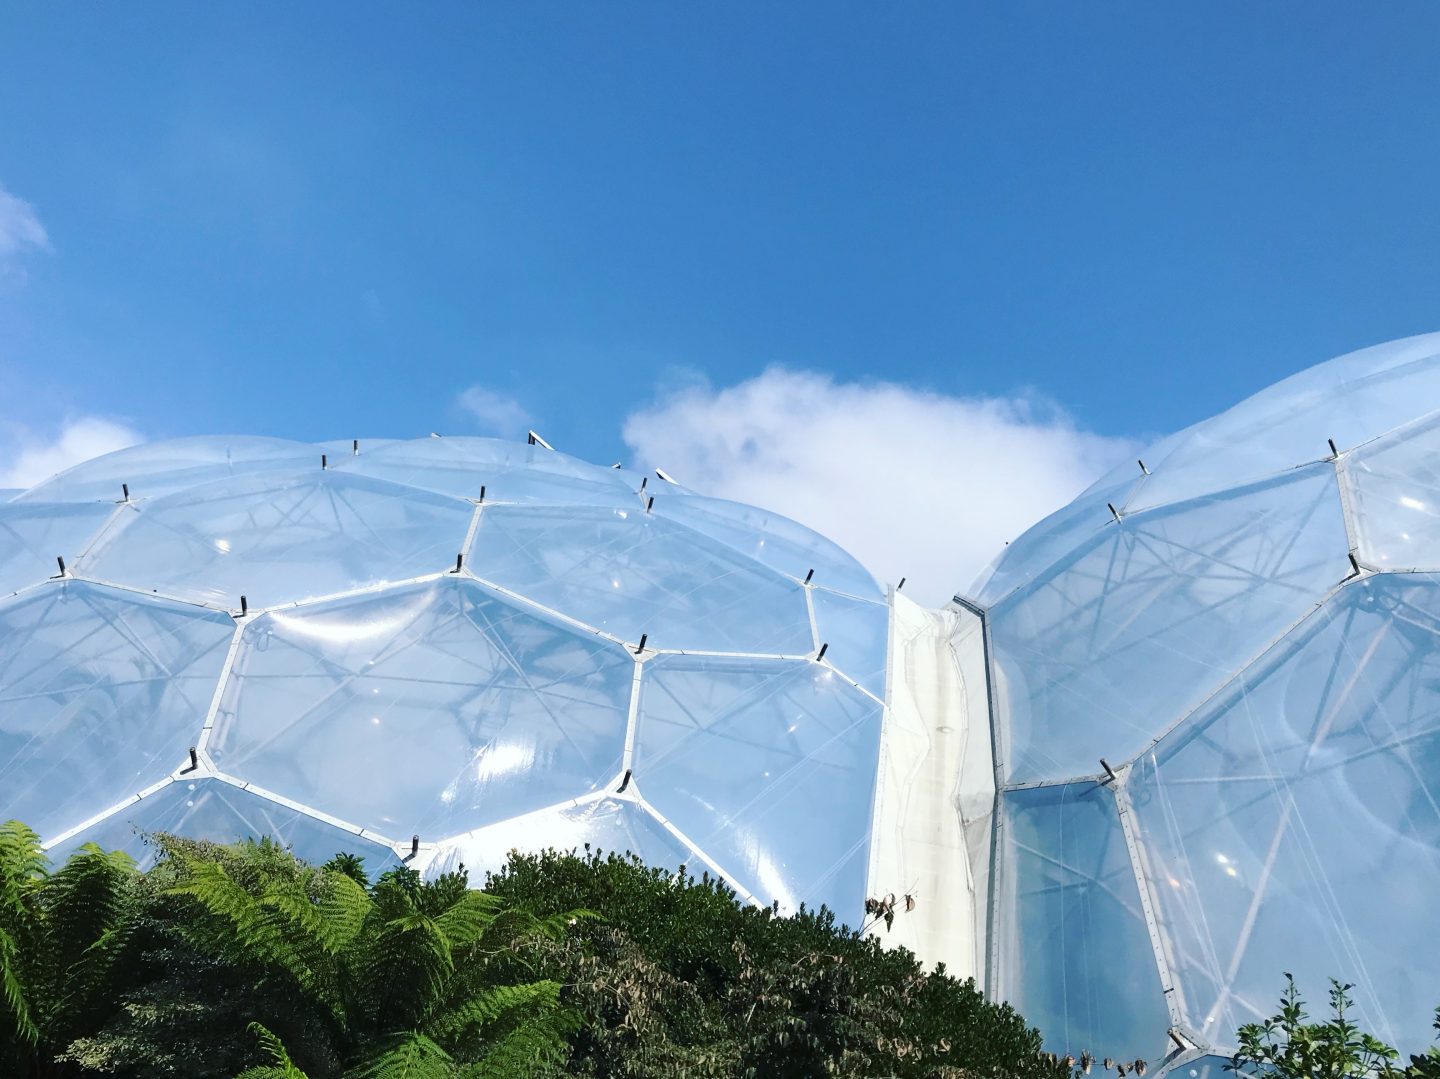 Eden Project – Cornwall